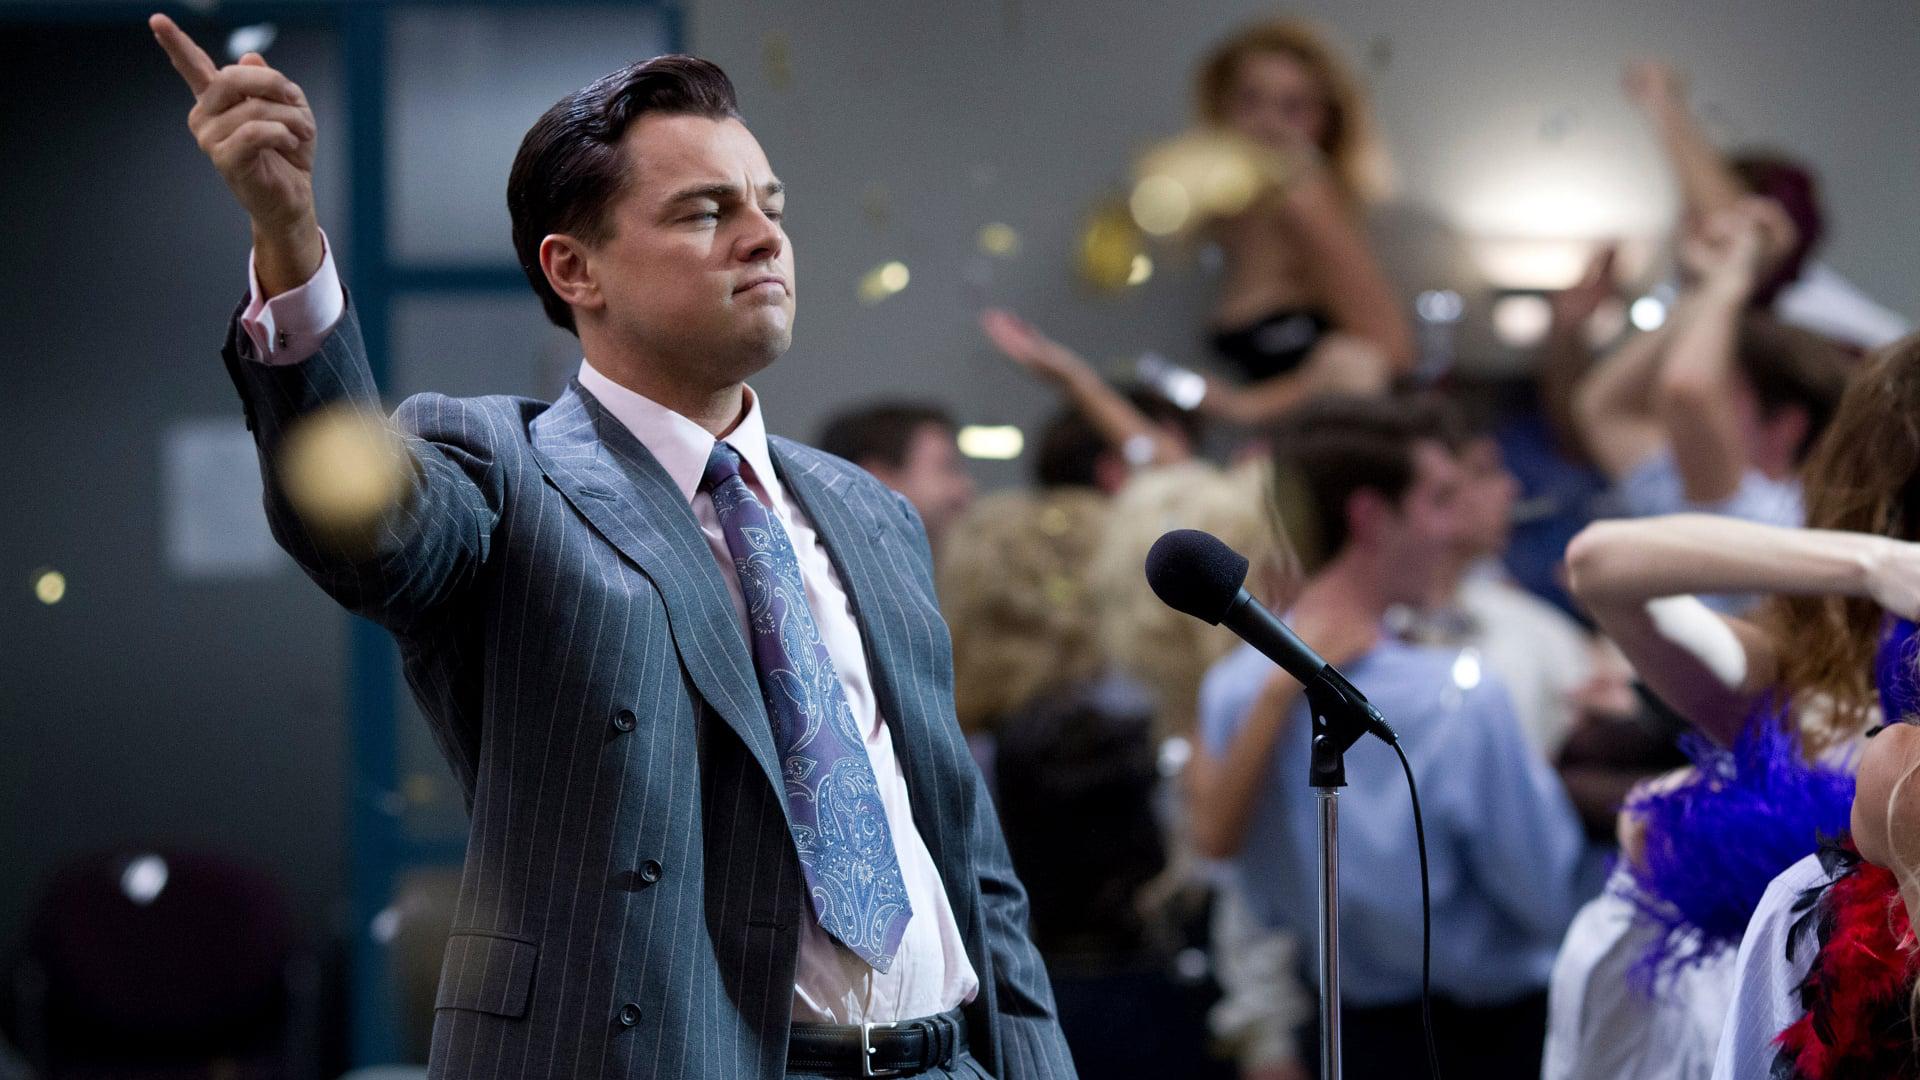 Backdrop Image for The Wolf of Wall Street